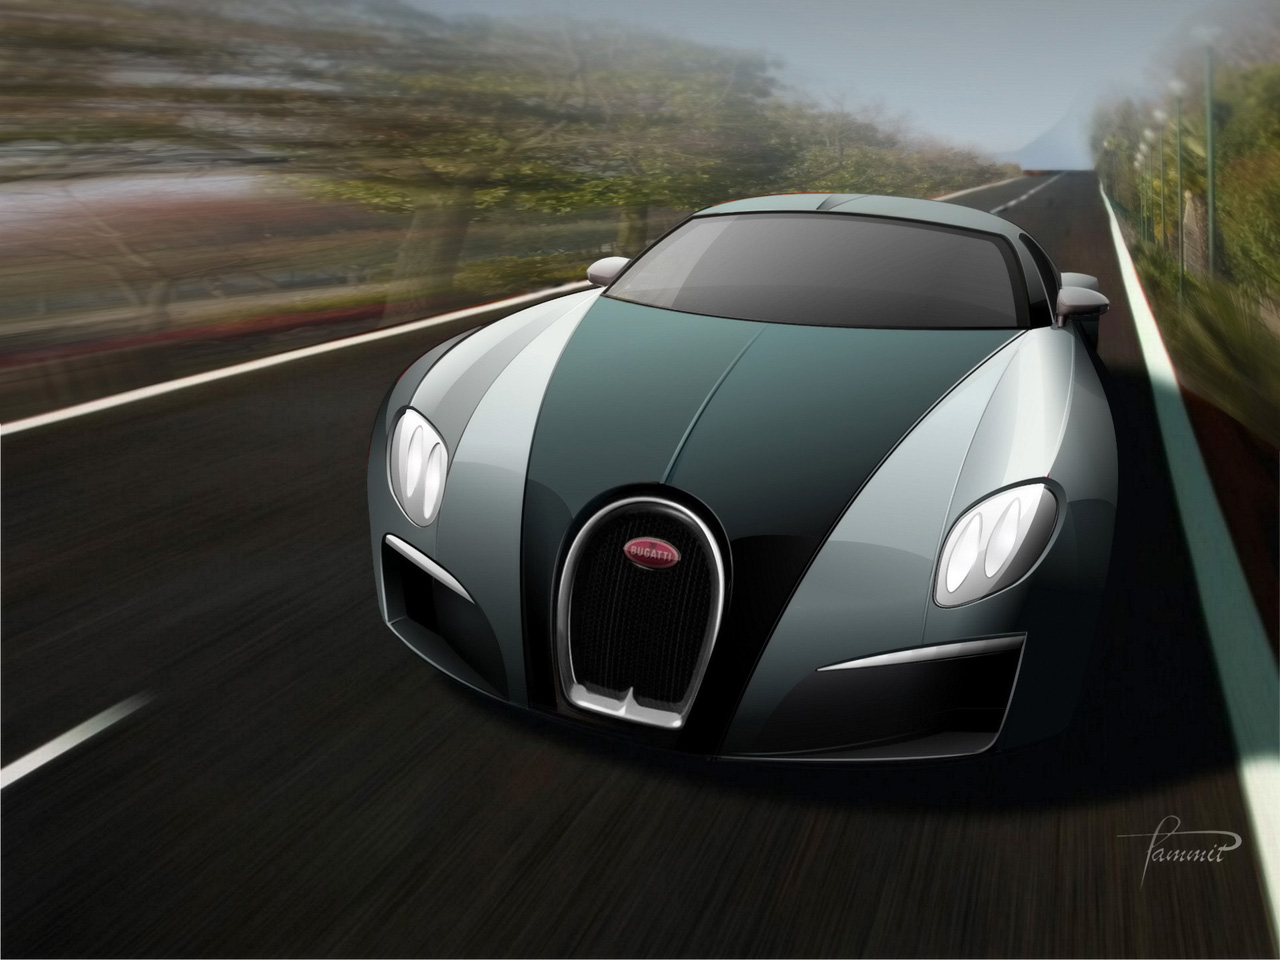 [2008-Bugatti-Type-12-2-Streamliner-Concept-Design-by-Racer-X-Design-Front-Angle-Speed-1280x960.jpg]